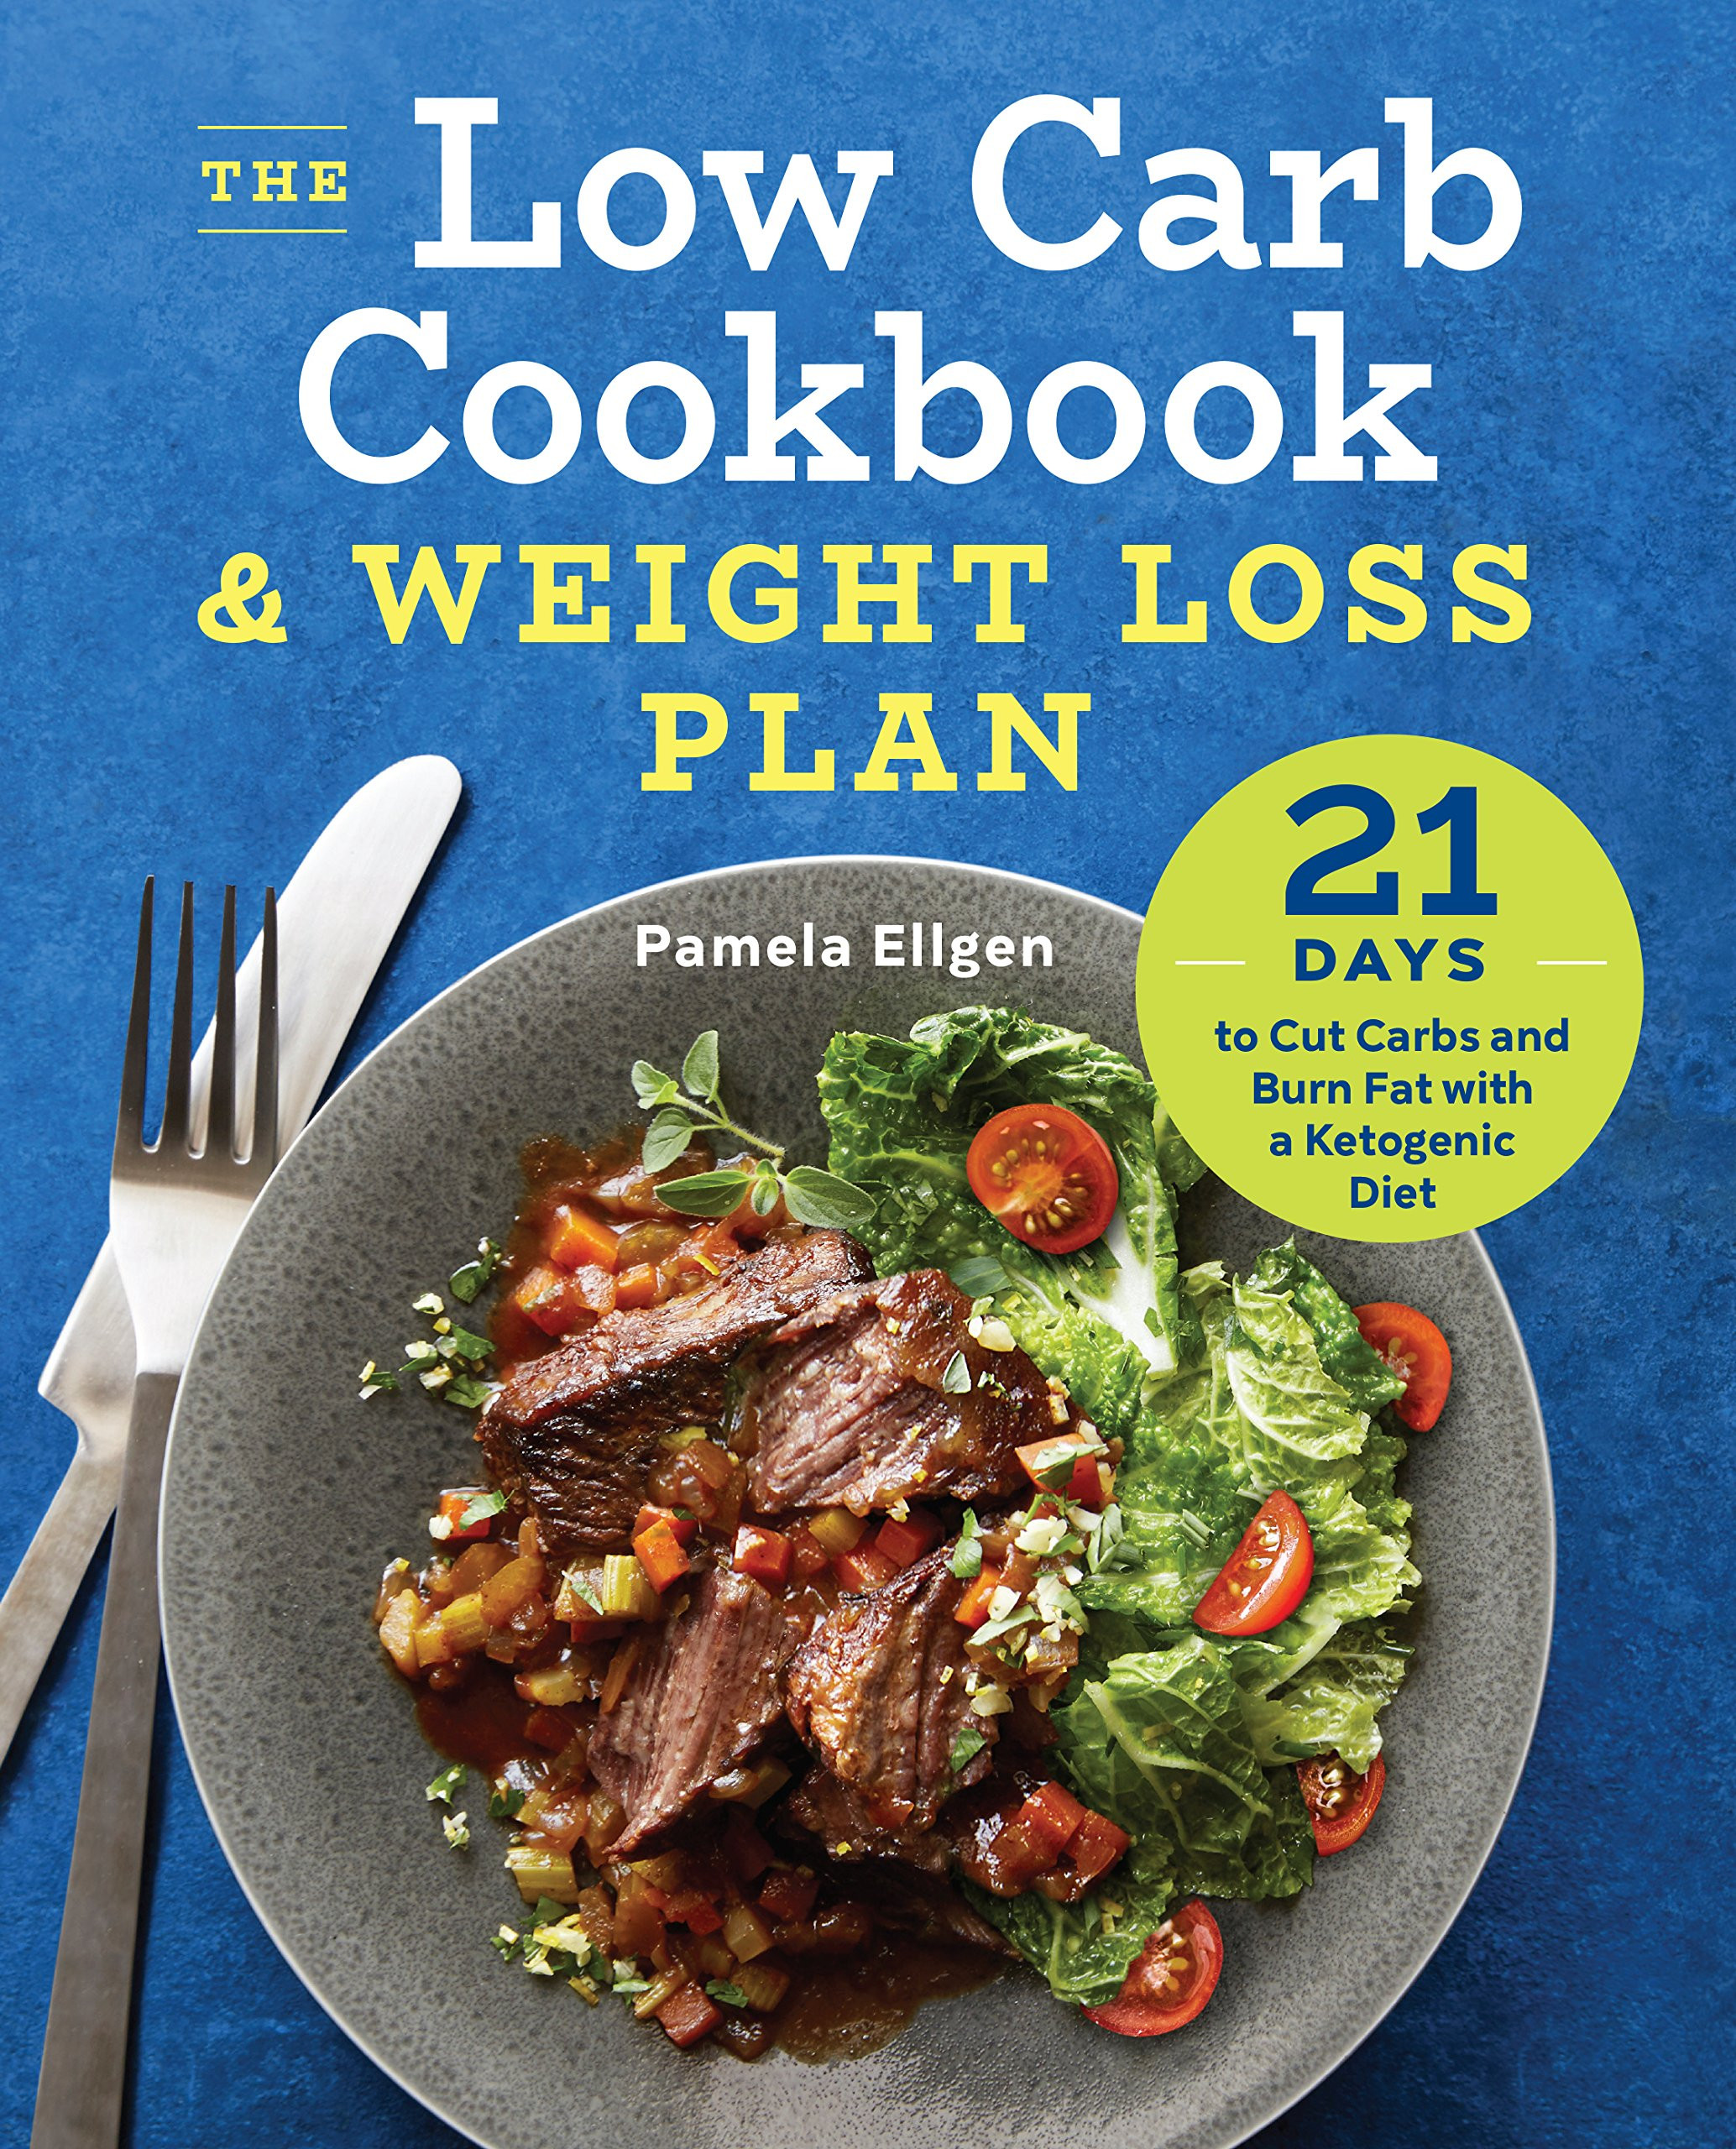 Low Carb Diet Plan 21 Days Losing Weight
 The Low Carb Cookbook & Weight Loss Plan 21 Days To Cut